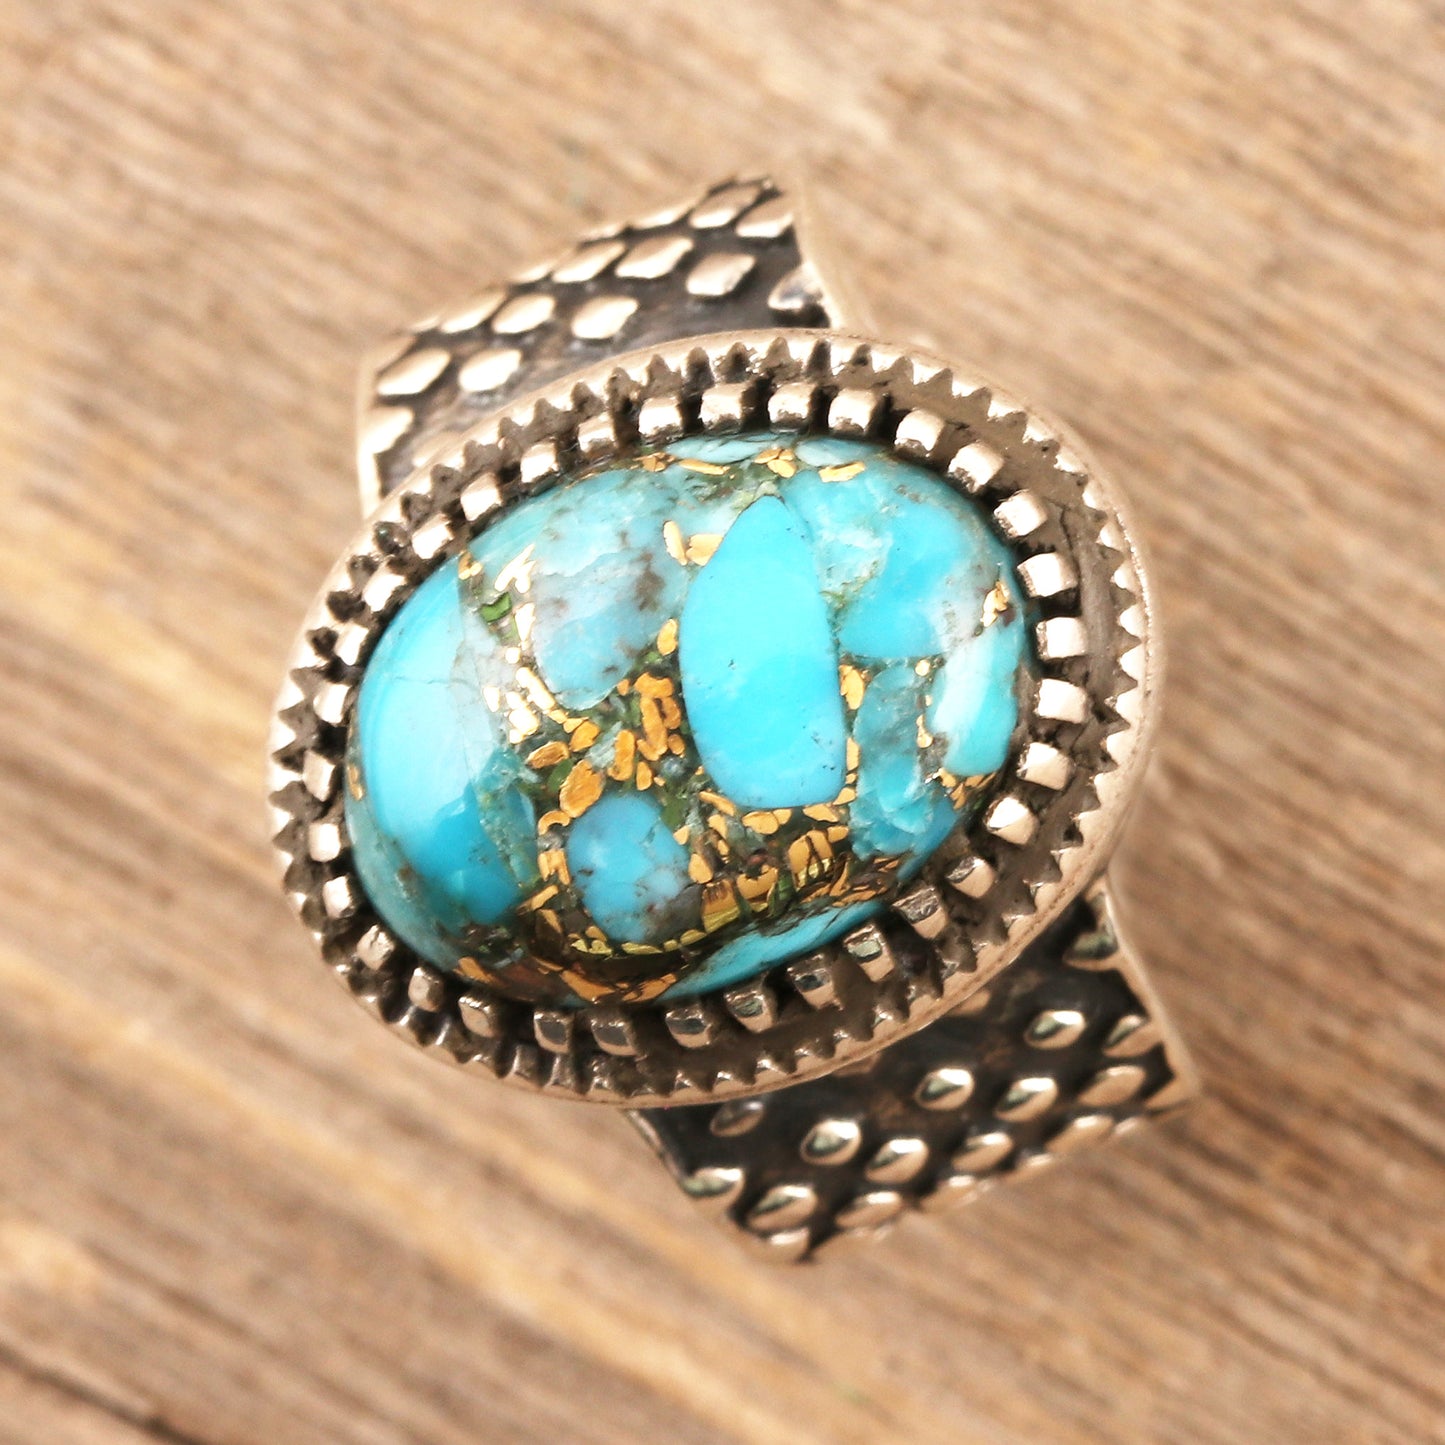 Majestic Allure Composite Turquoise and Sterling Silver Men's Ring